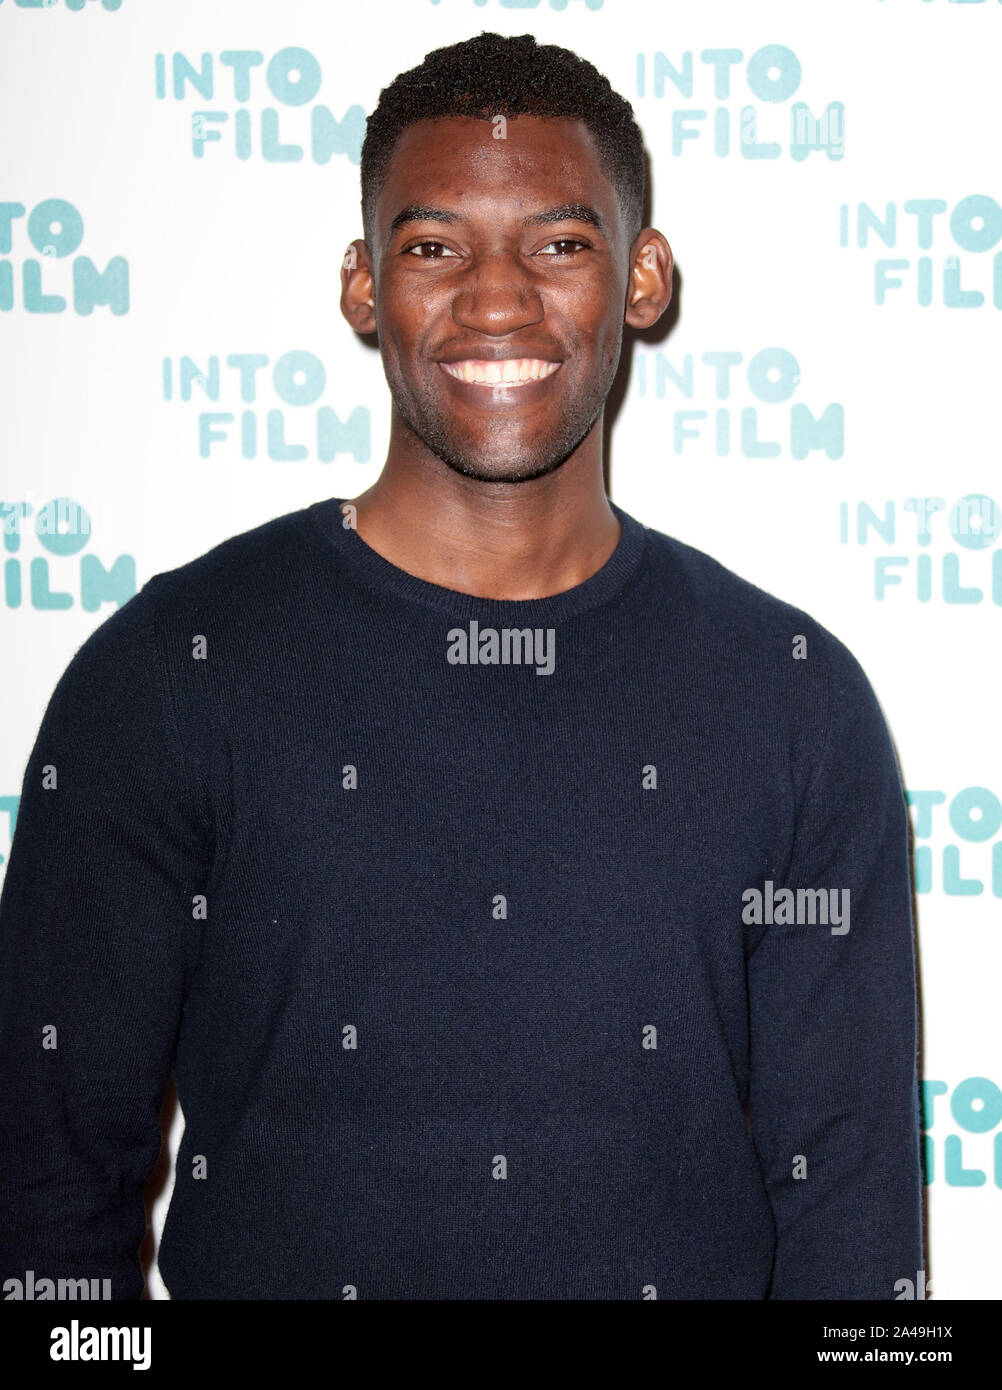 Mar 04, 2019 - London, England, UK - Malachi Kirby attending  Into Film Award 2019, Odeon Luxe, Leicester Square Stock Photo